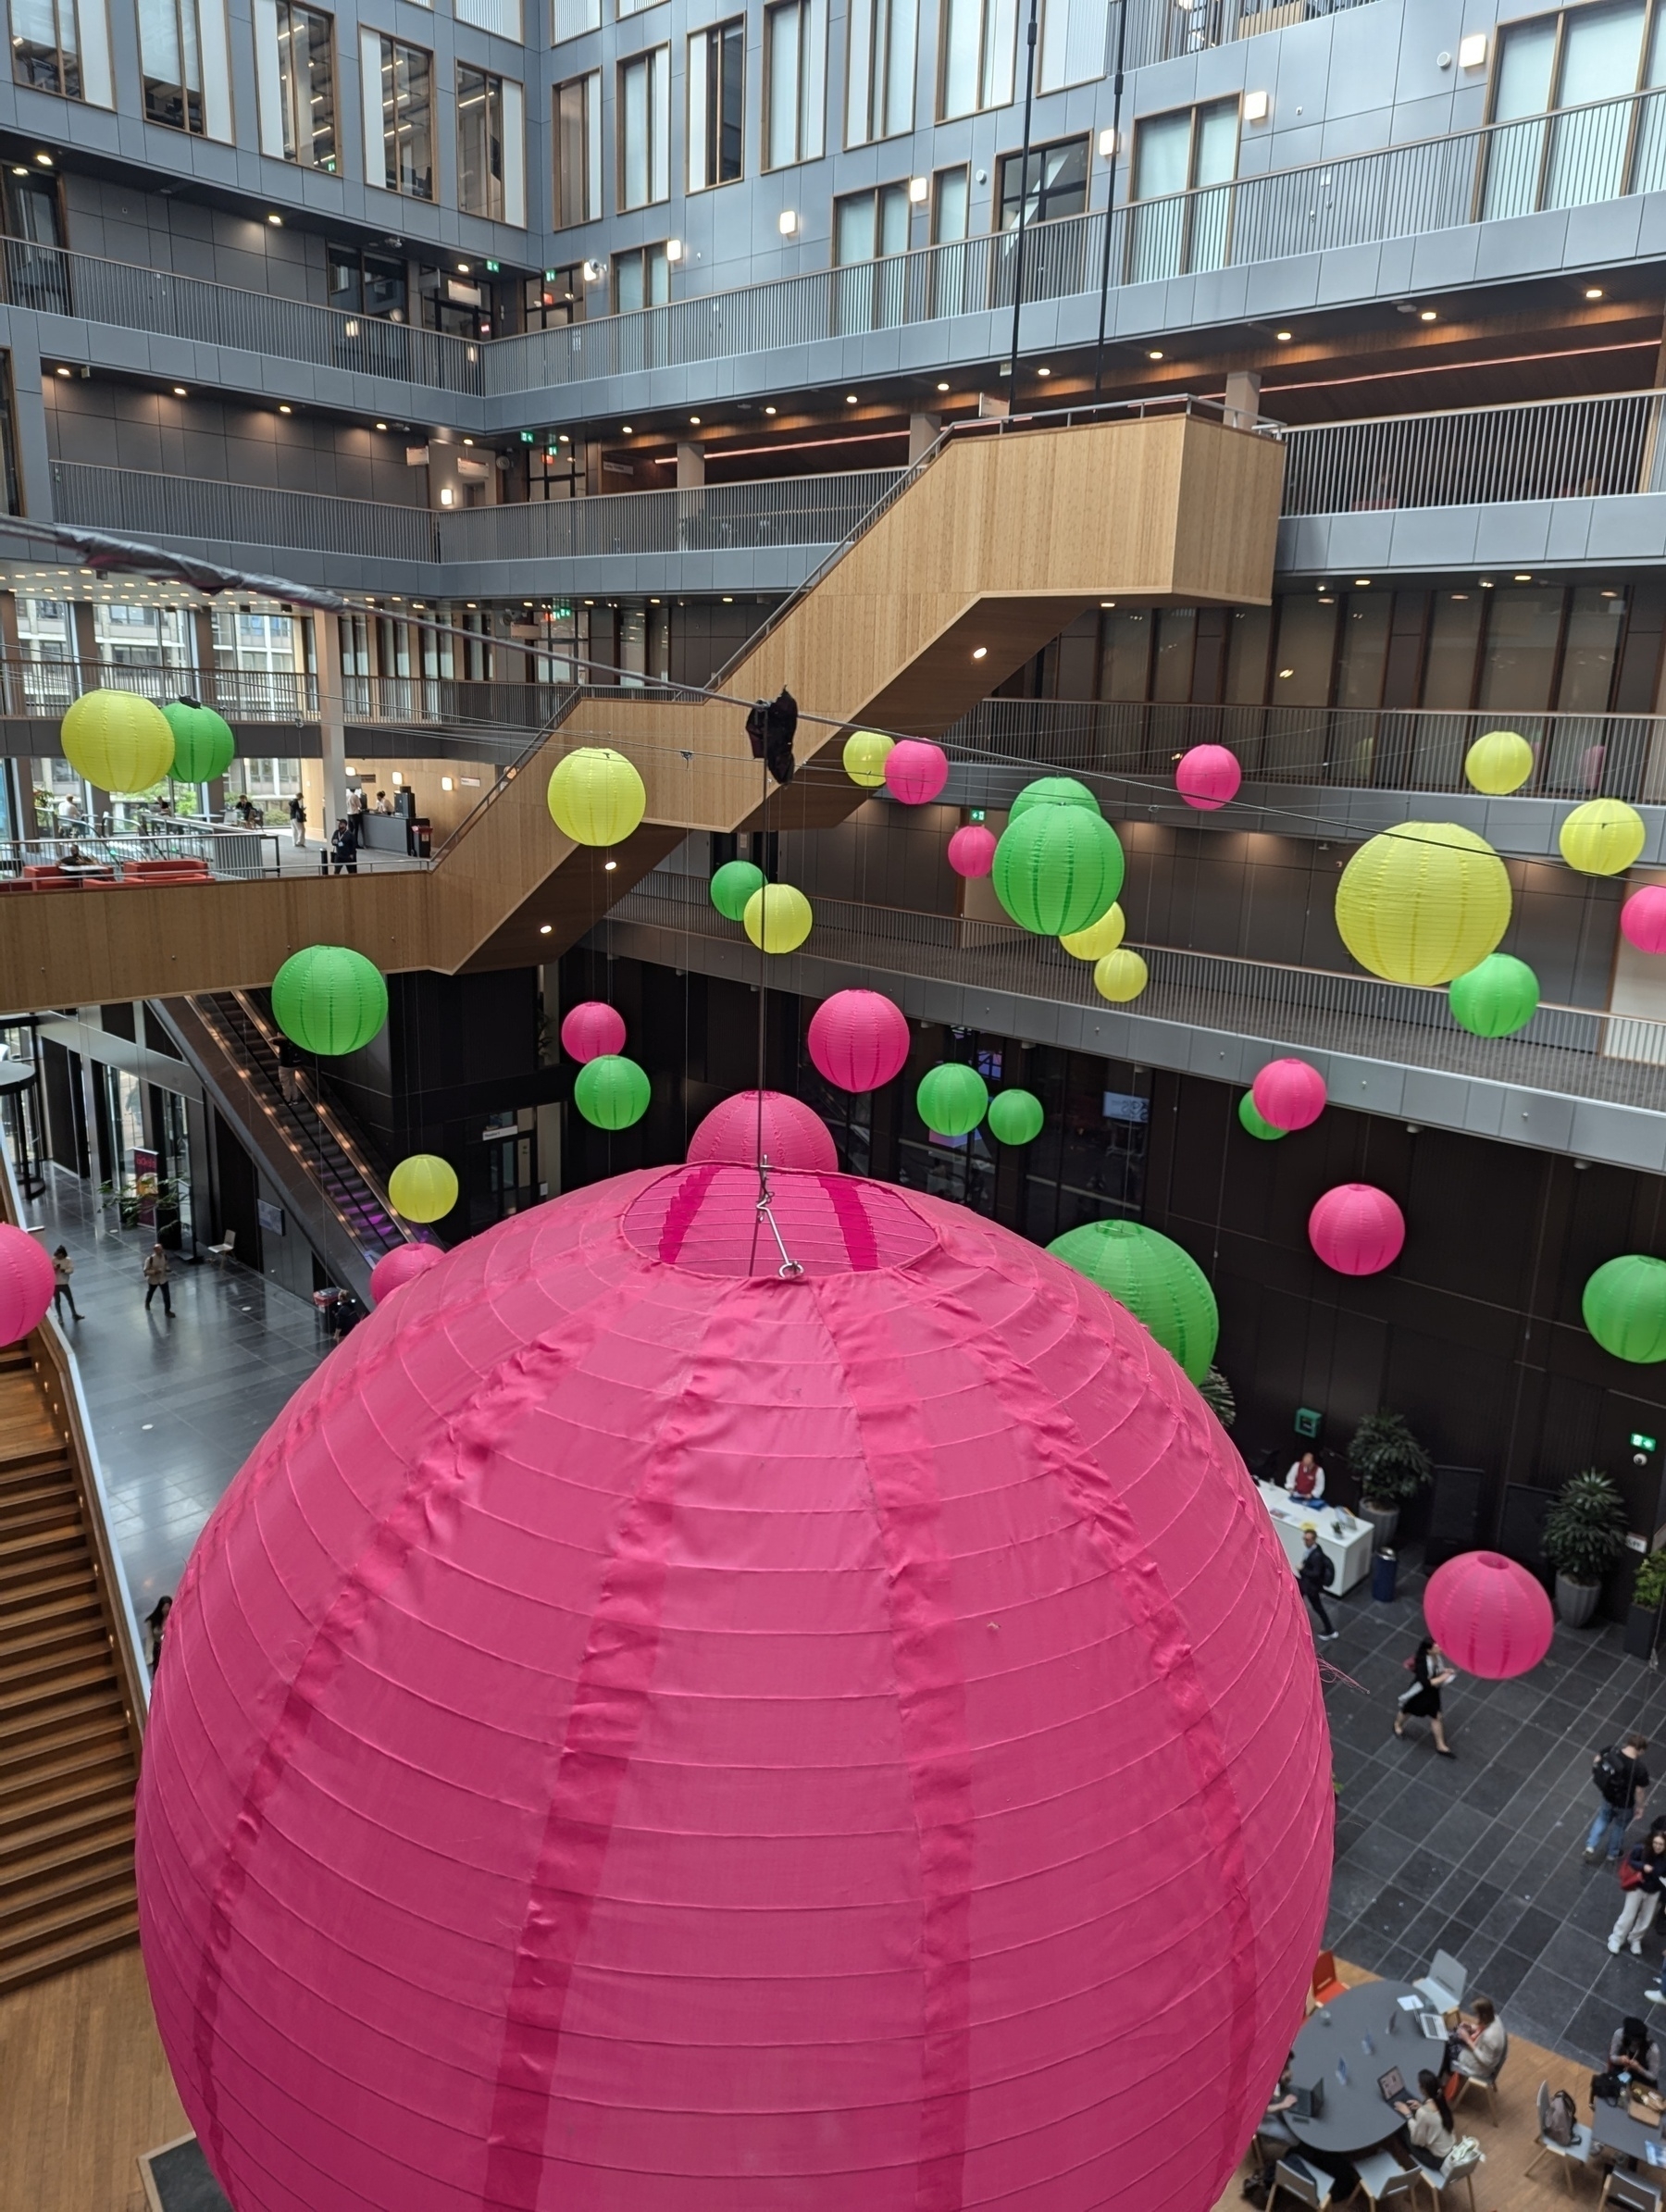 Photography from the inside of the new main building of free university, Amsterdam. You see wooden stairs, colourful light balloons, and a large hall below